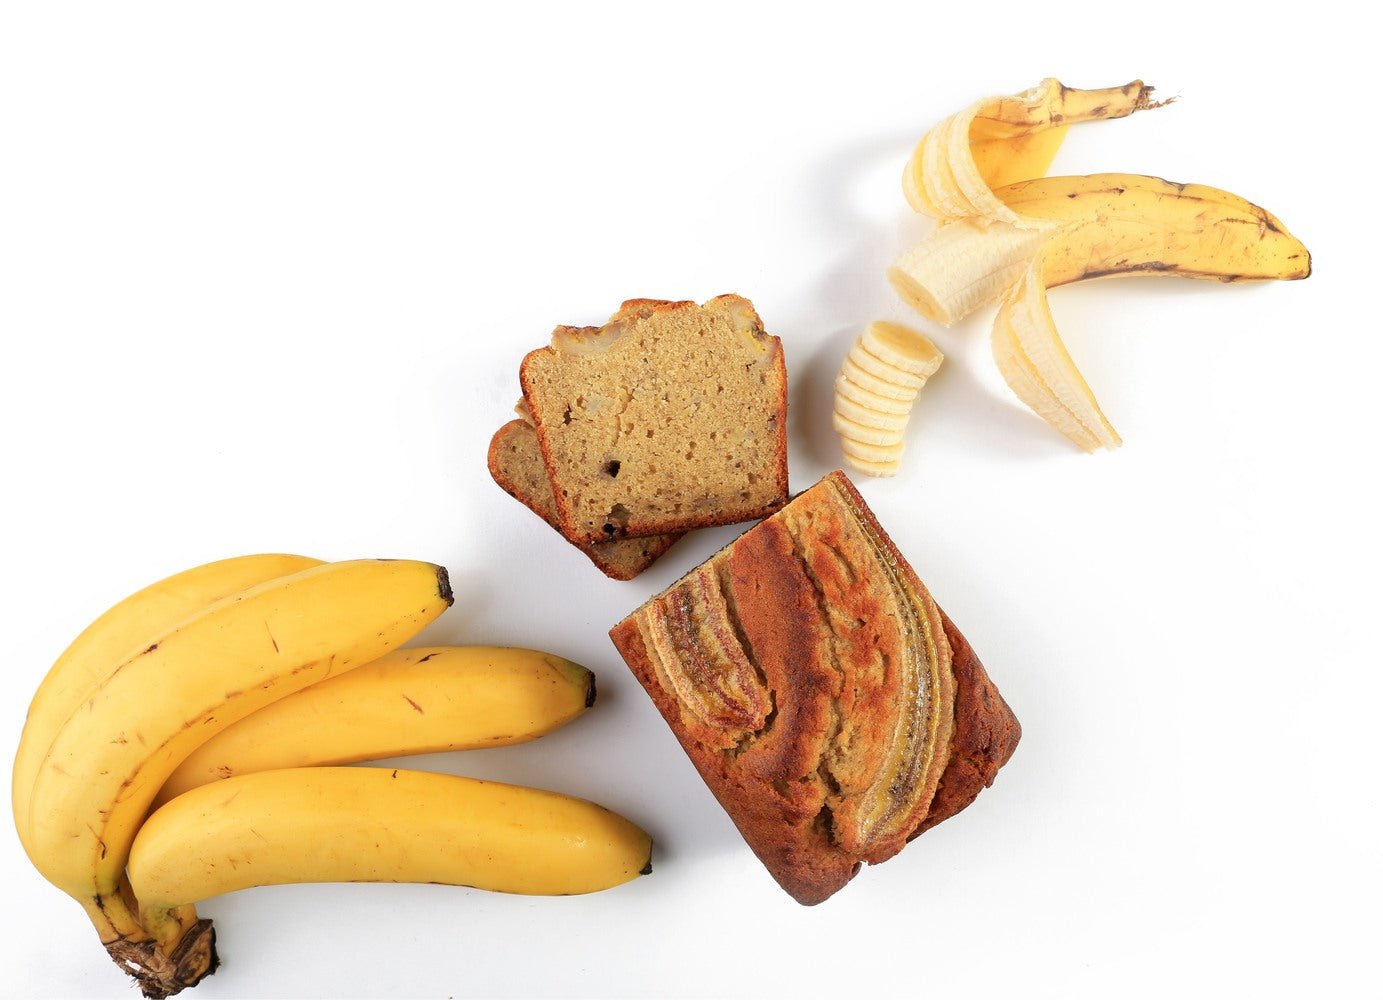 Why did we create a Low Carb Banana Bread? - PBCo.